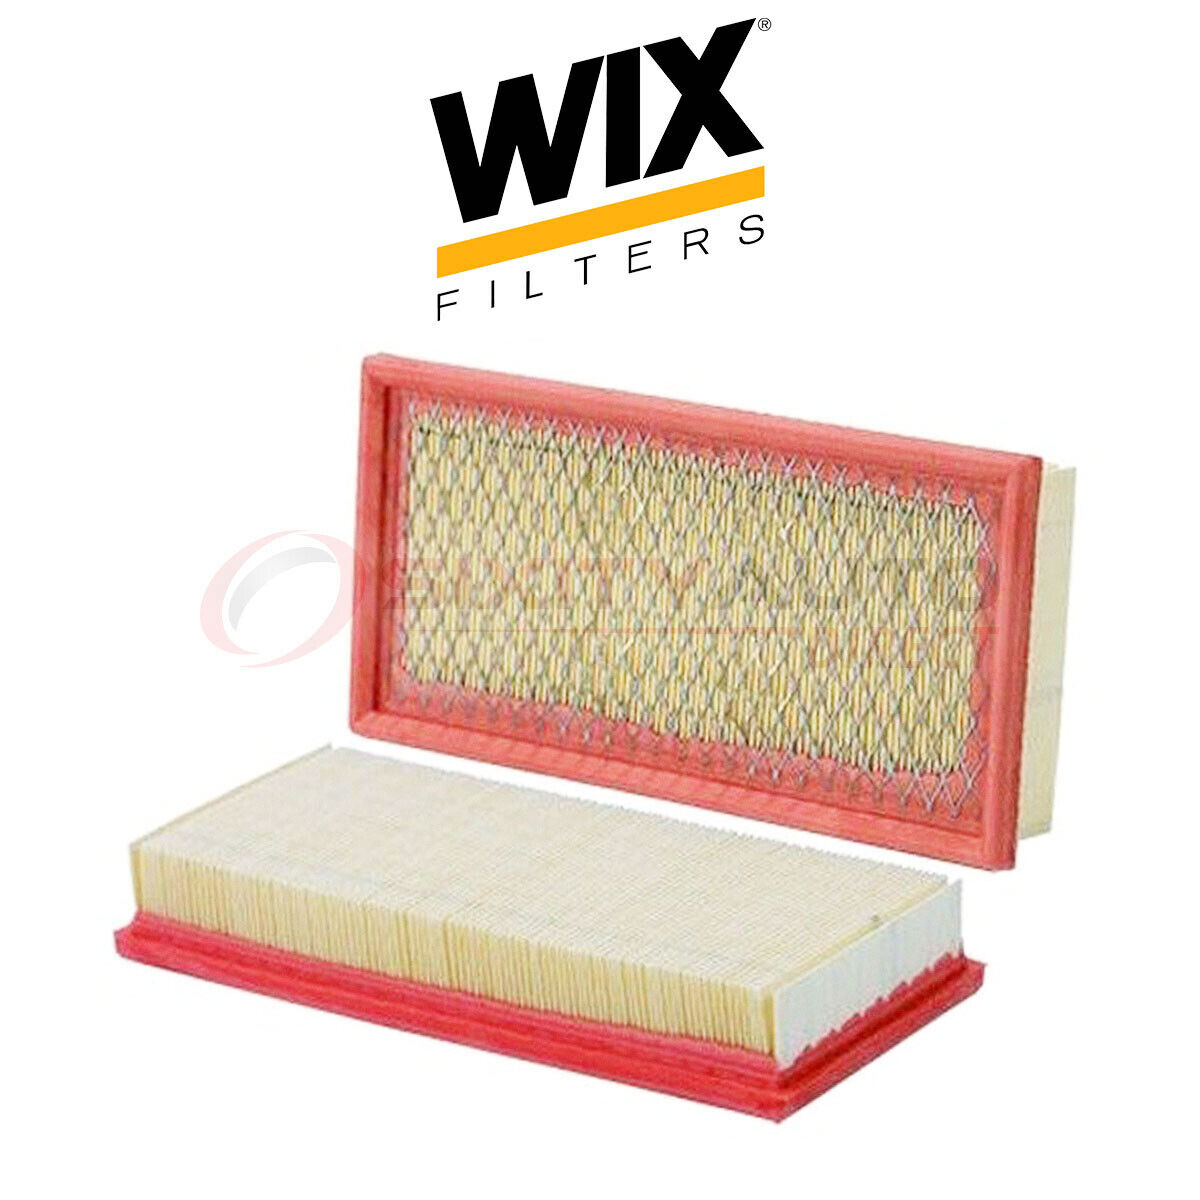 WIX Air Filter for 1992-1994 Plymouth Sundance 3.0L V6 - Filtration System nf